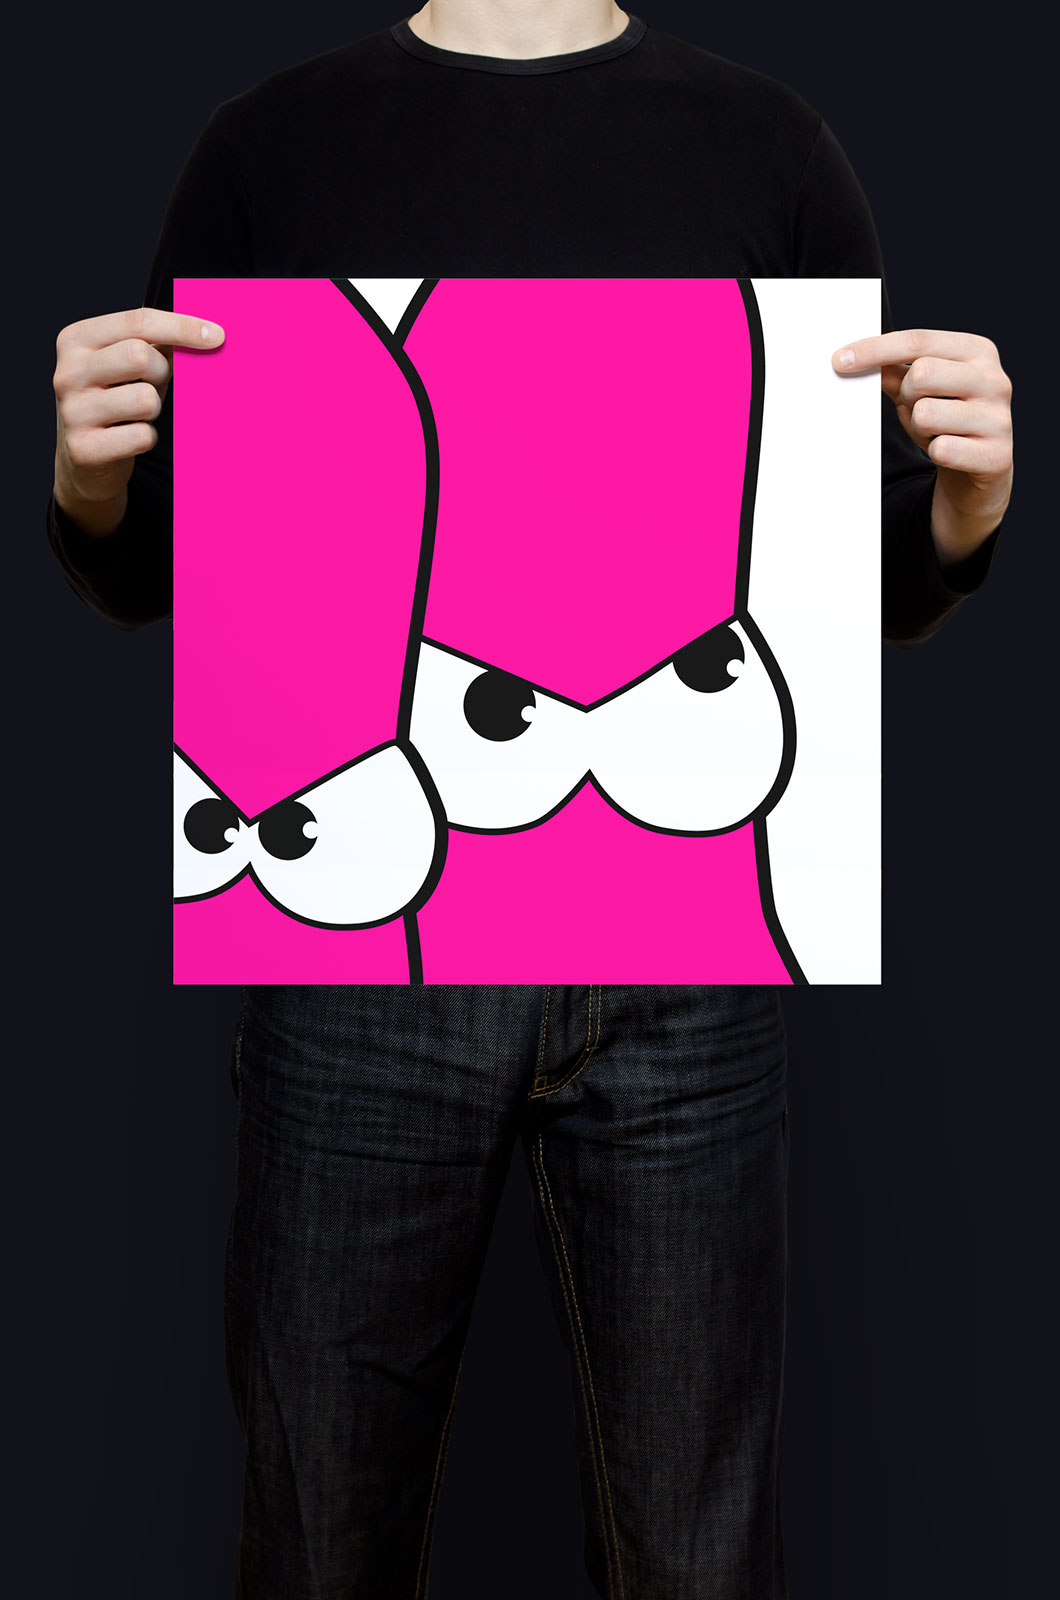 Alexander Glante - Works - The Pink Thing - 02